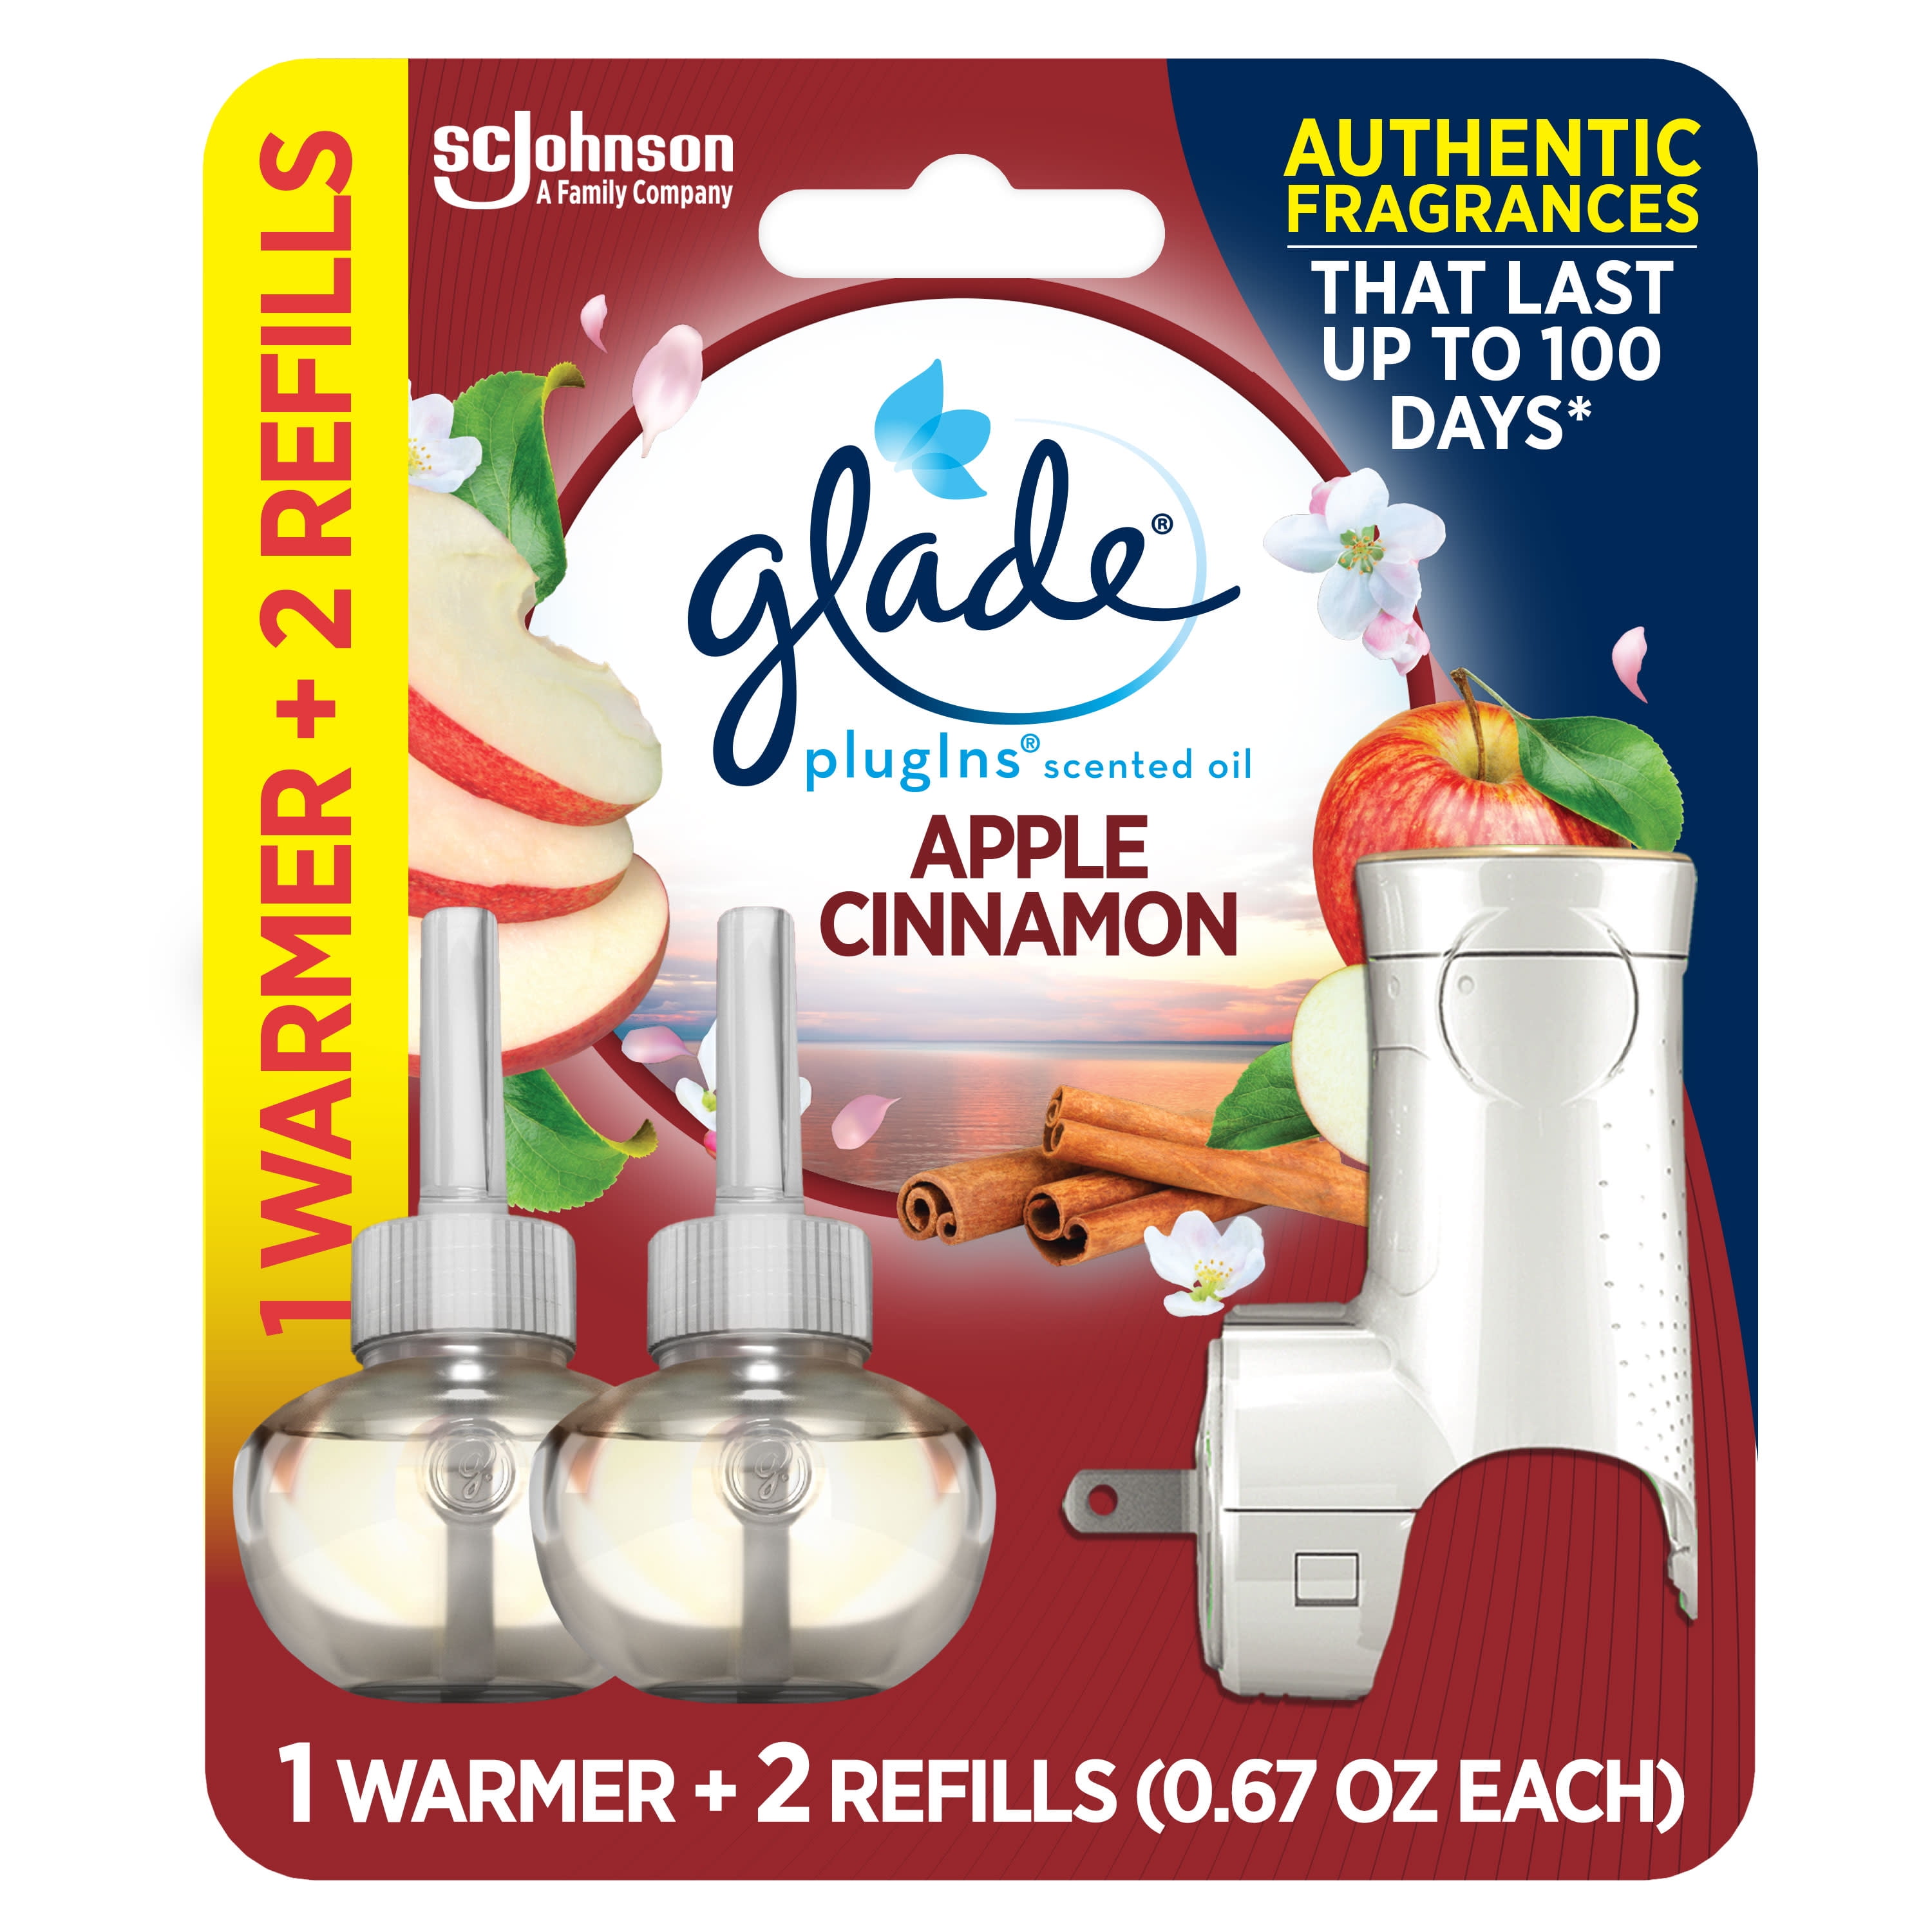 Glade PlugIns Scented Oil Warmers + 2 Refills, Air Freshener